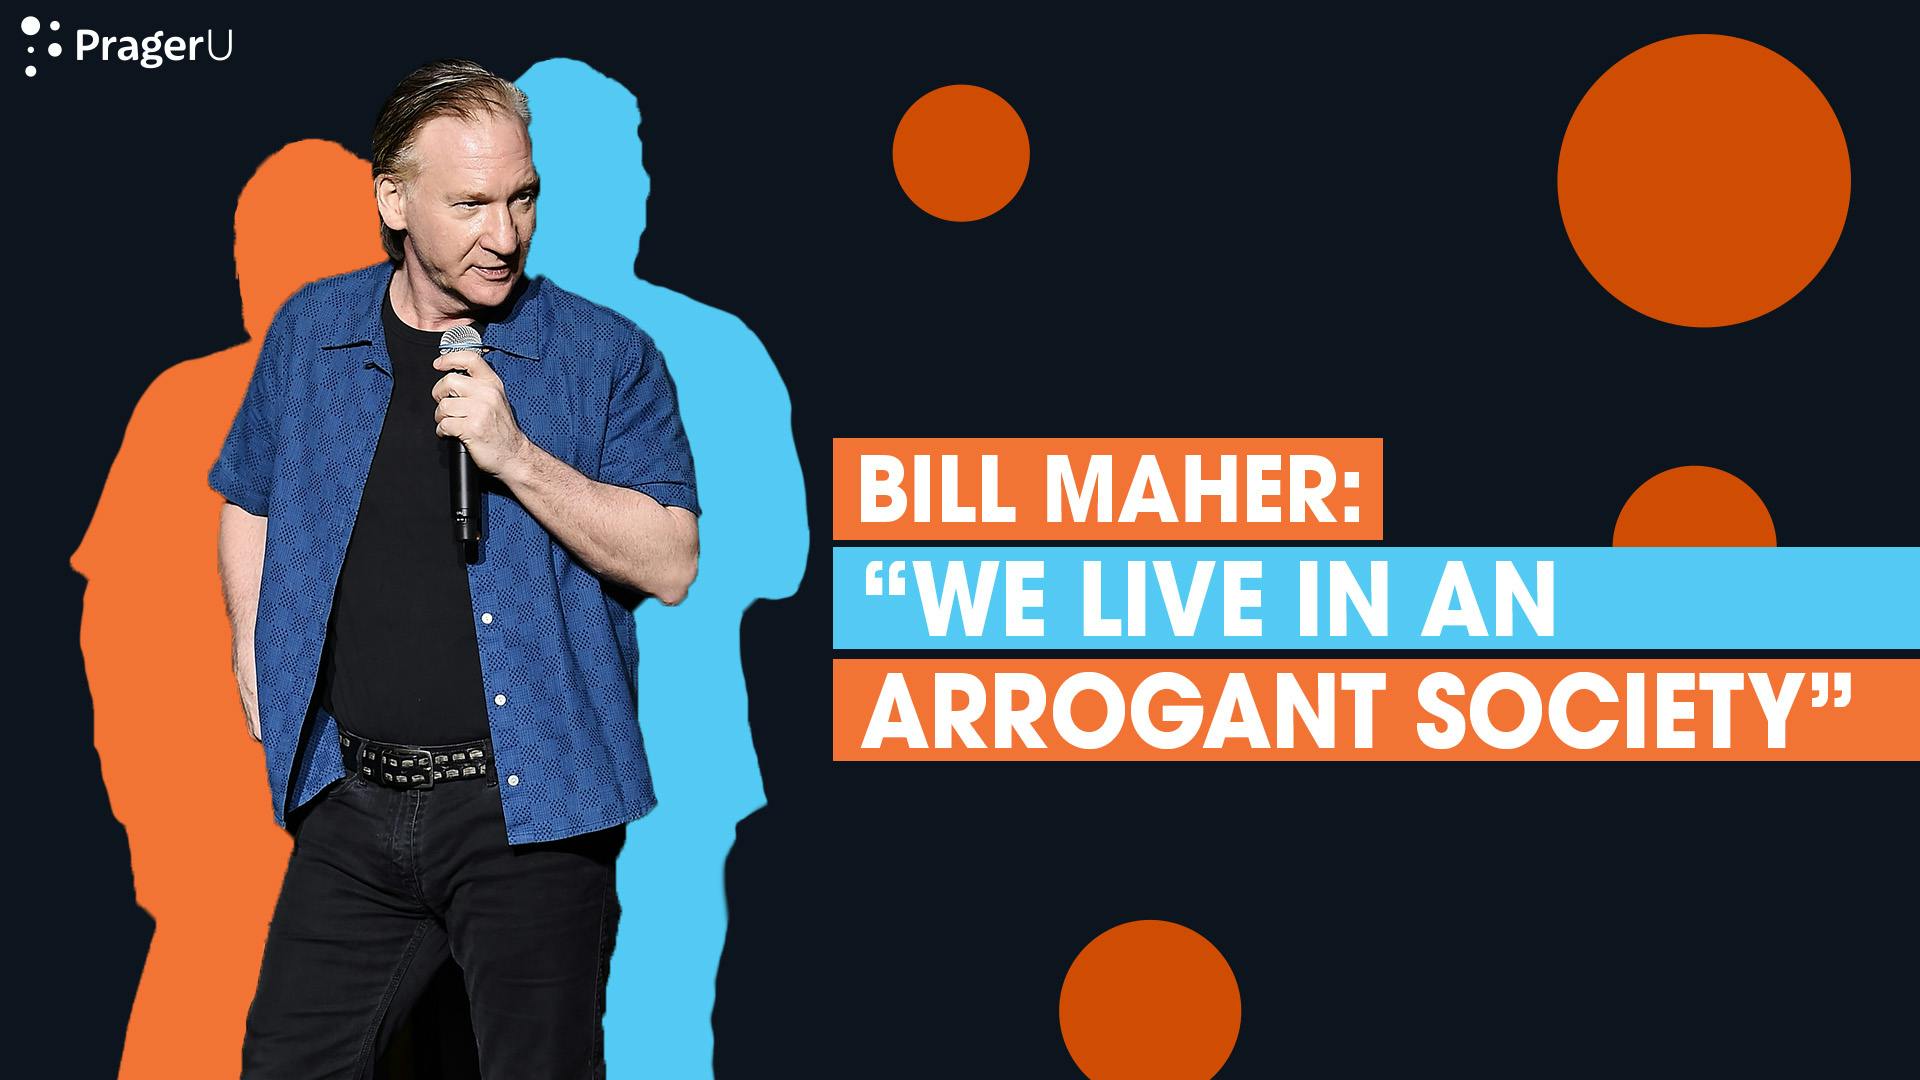 Bill Maher: "We Live in an Arrogant Society"